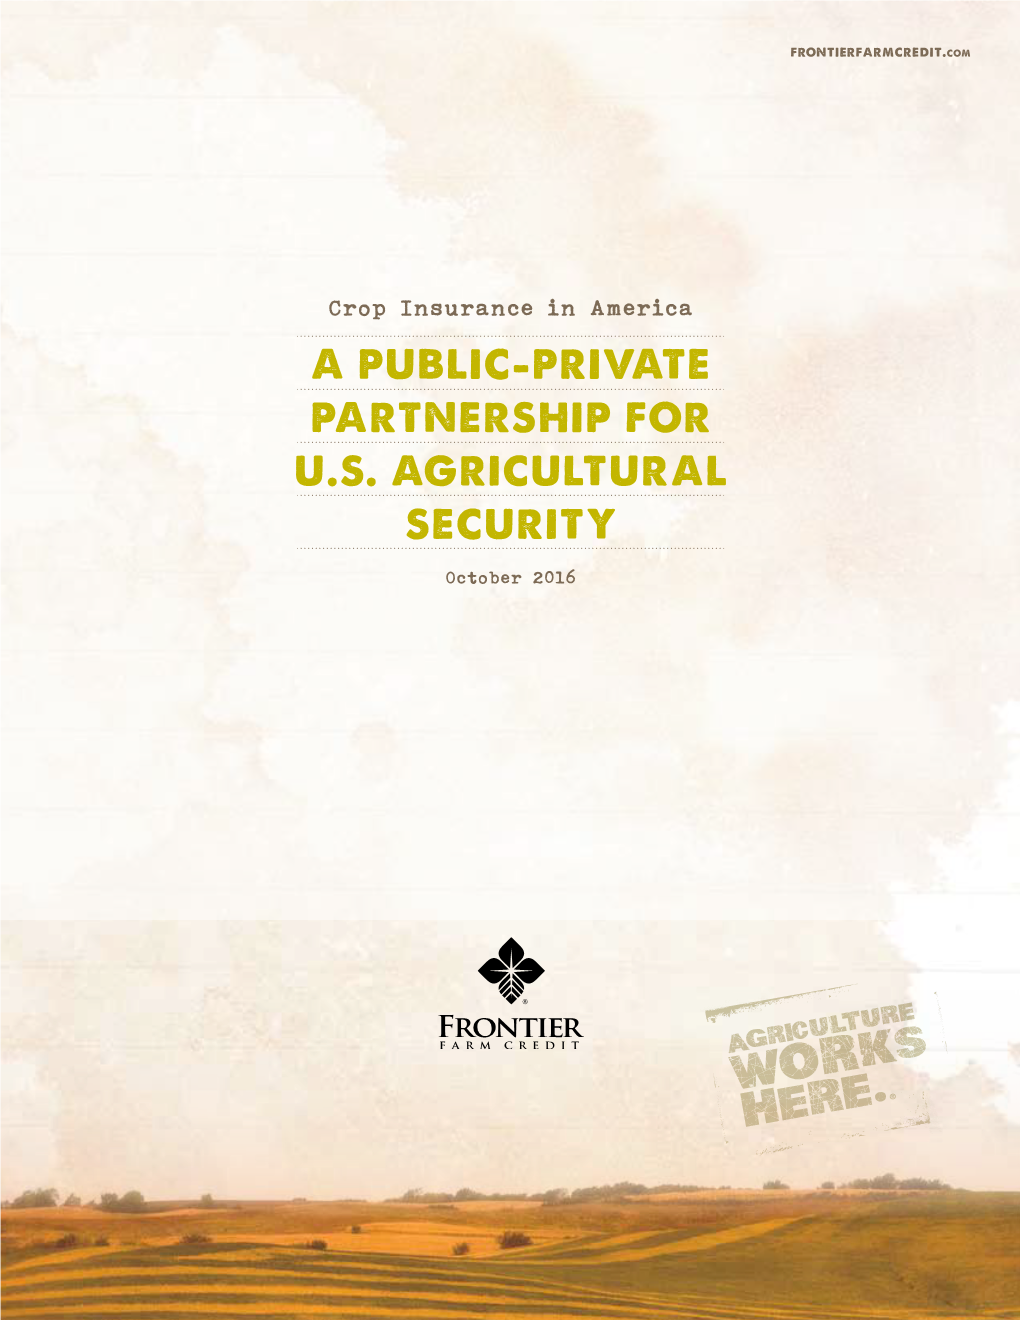 A Public-Private Partnership for U.S. Agricultural Security